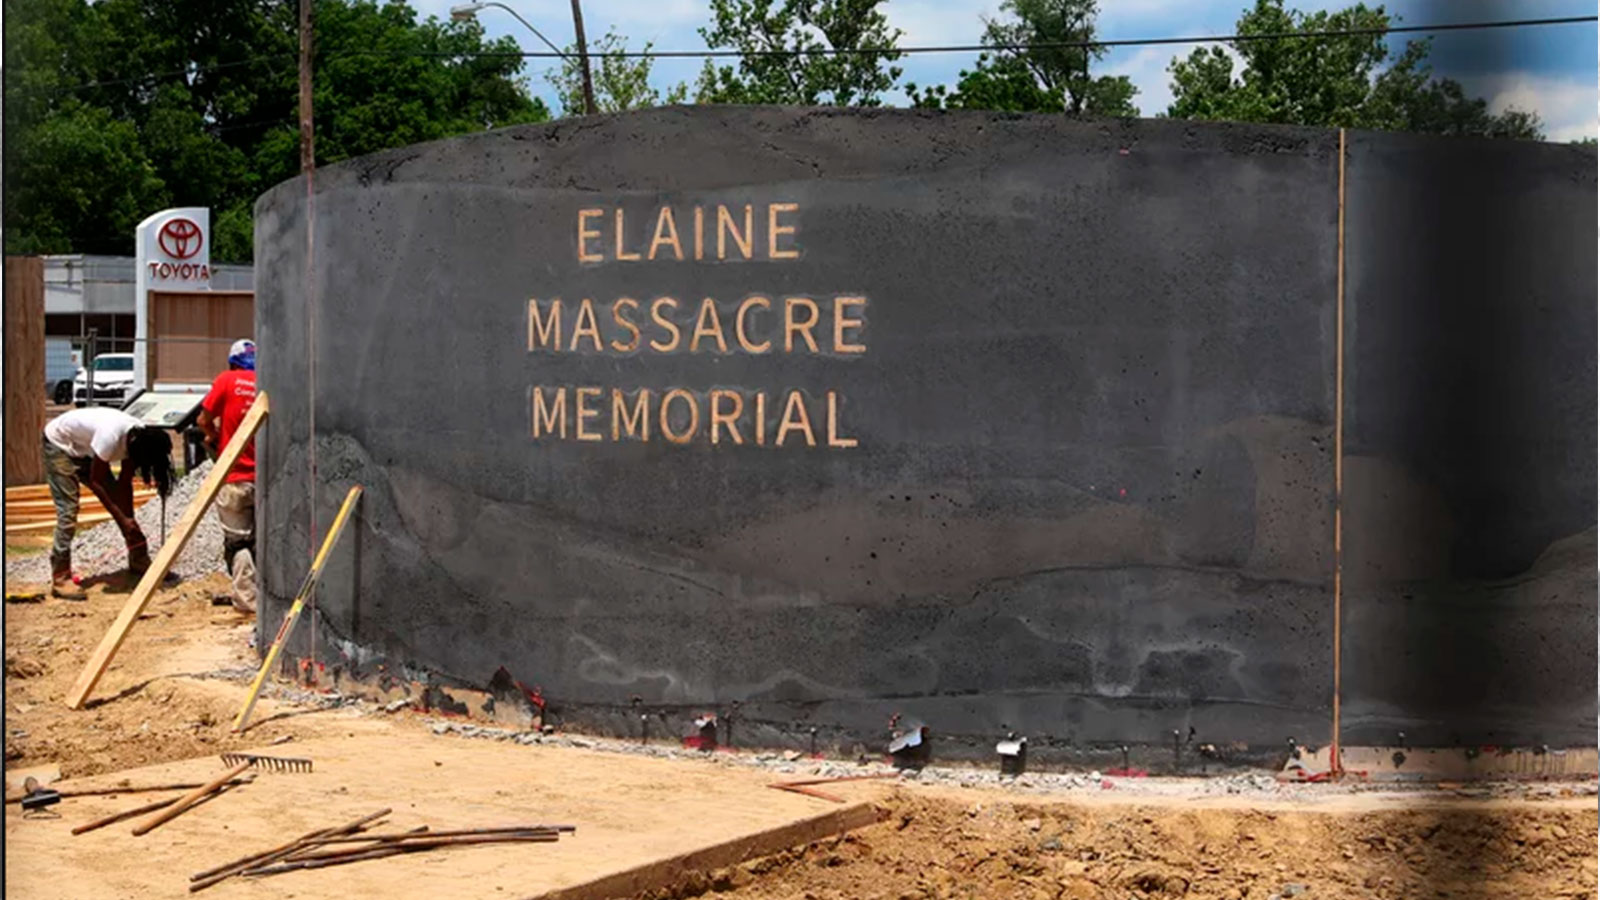 A construction crew works on the monument honoring victims of the Elaine massacre in Helena, Ark., on June 15, 2019. 